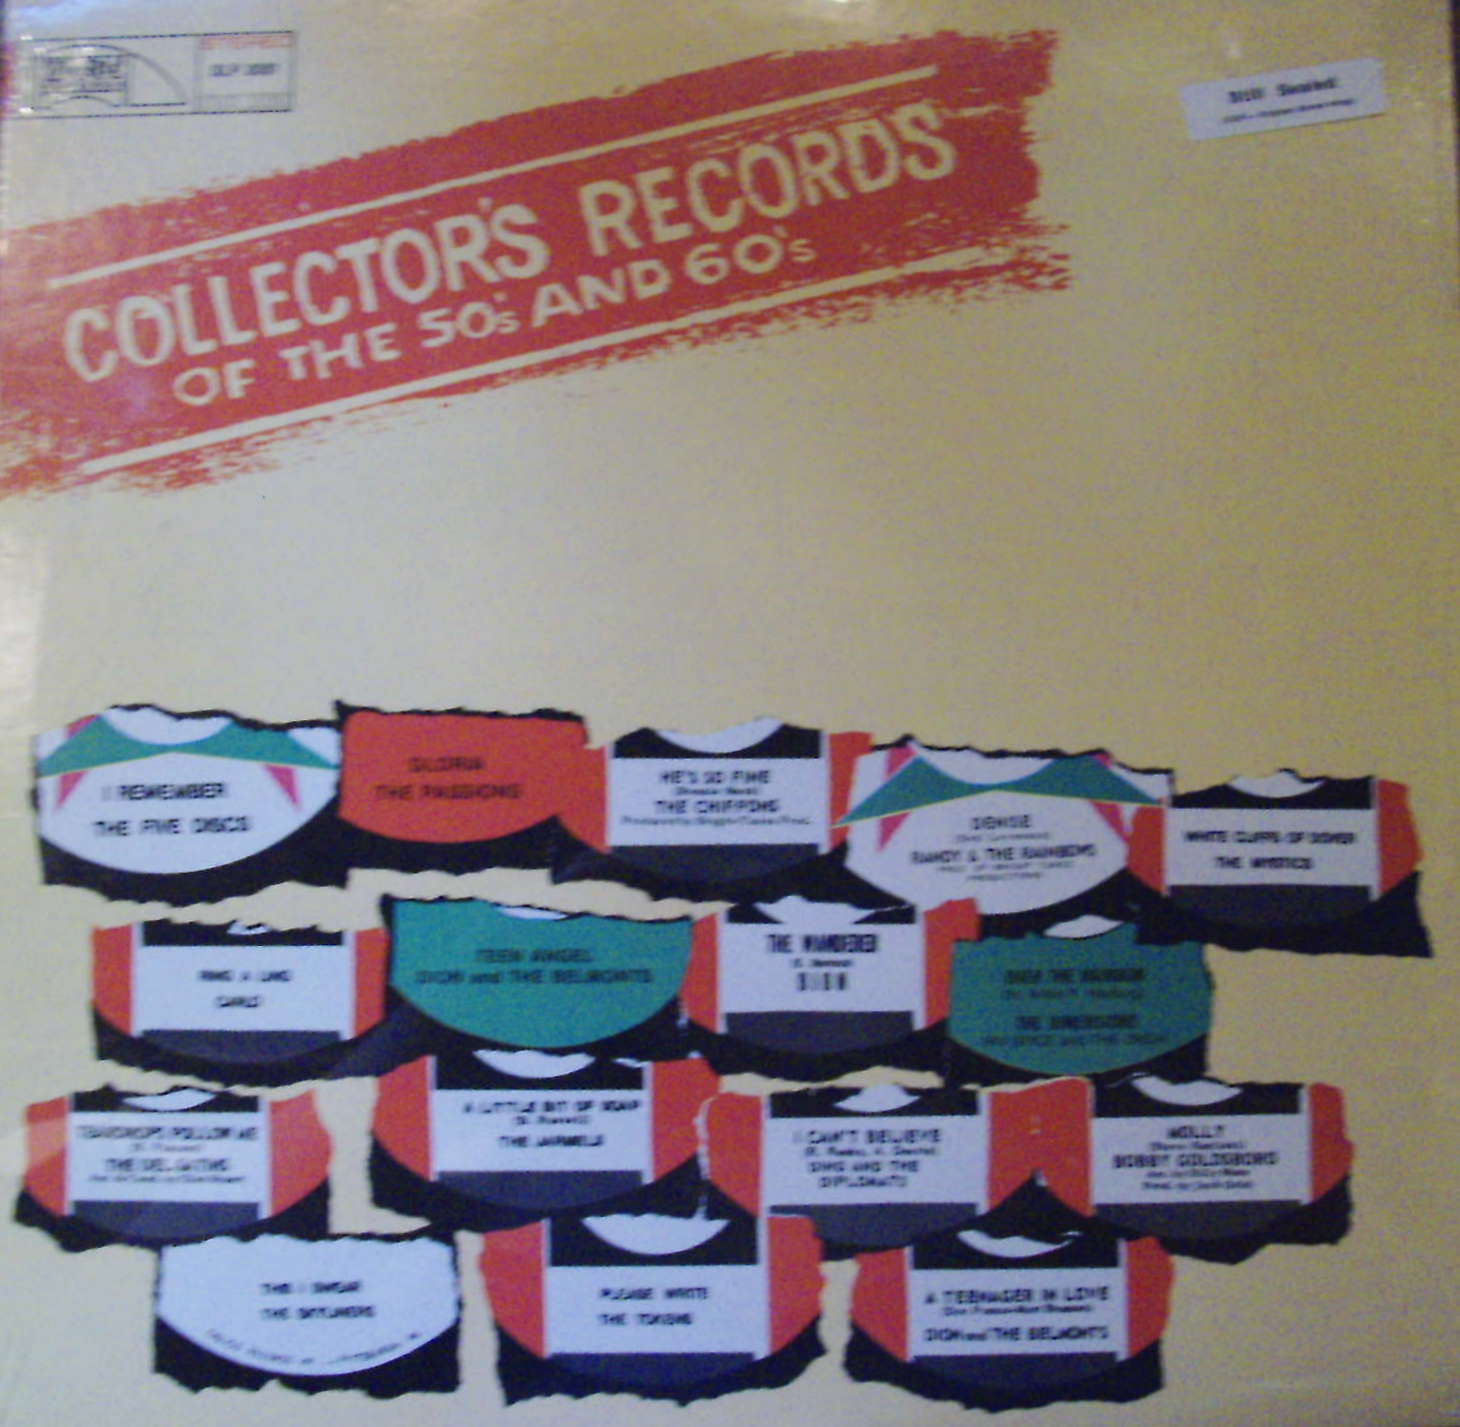 Various Artists / Collector's Records of the 50's and 60's